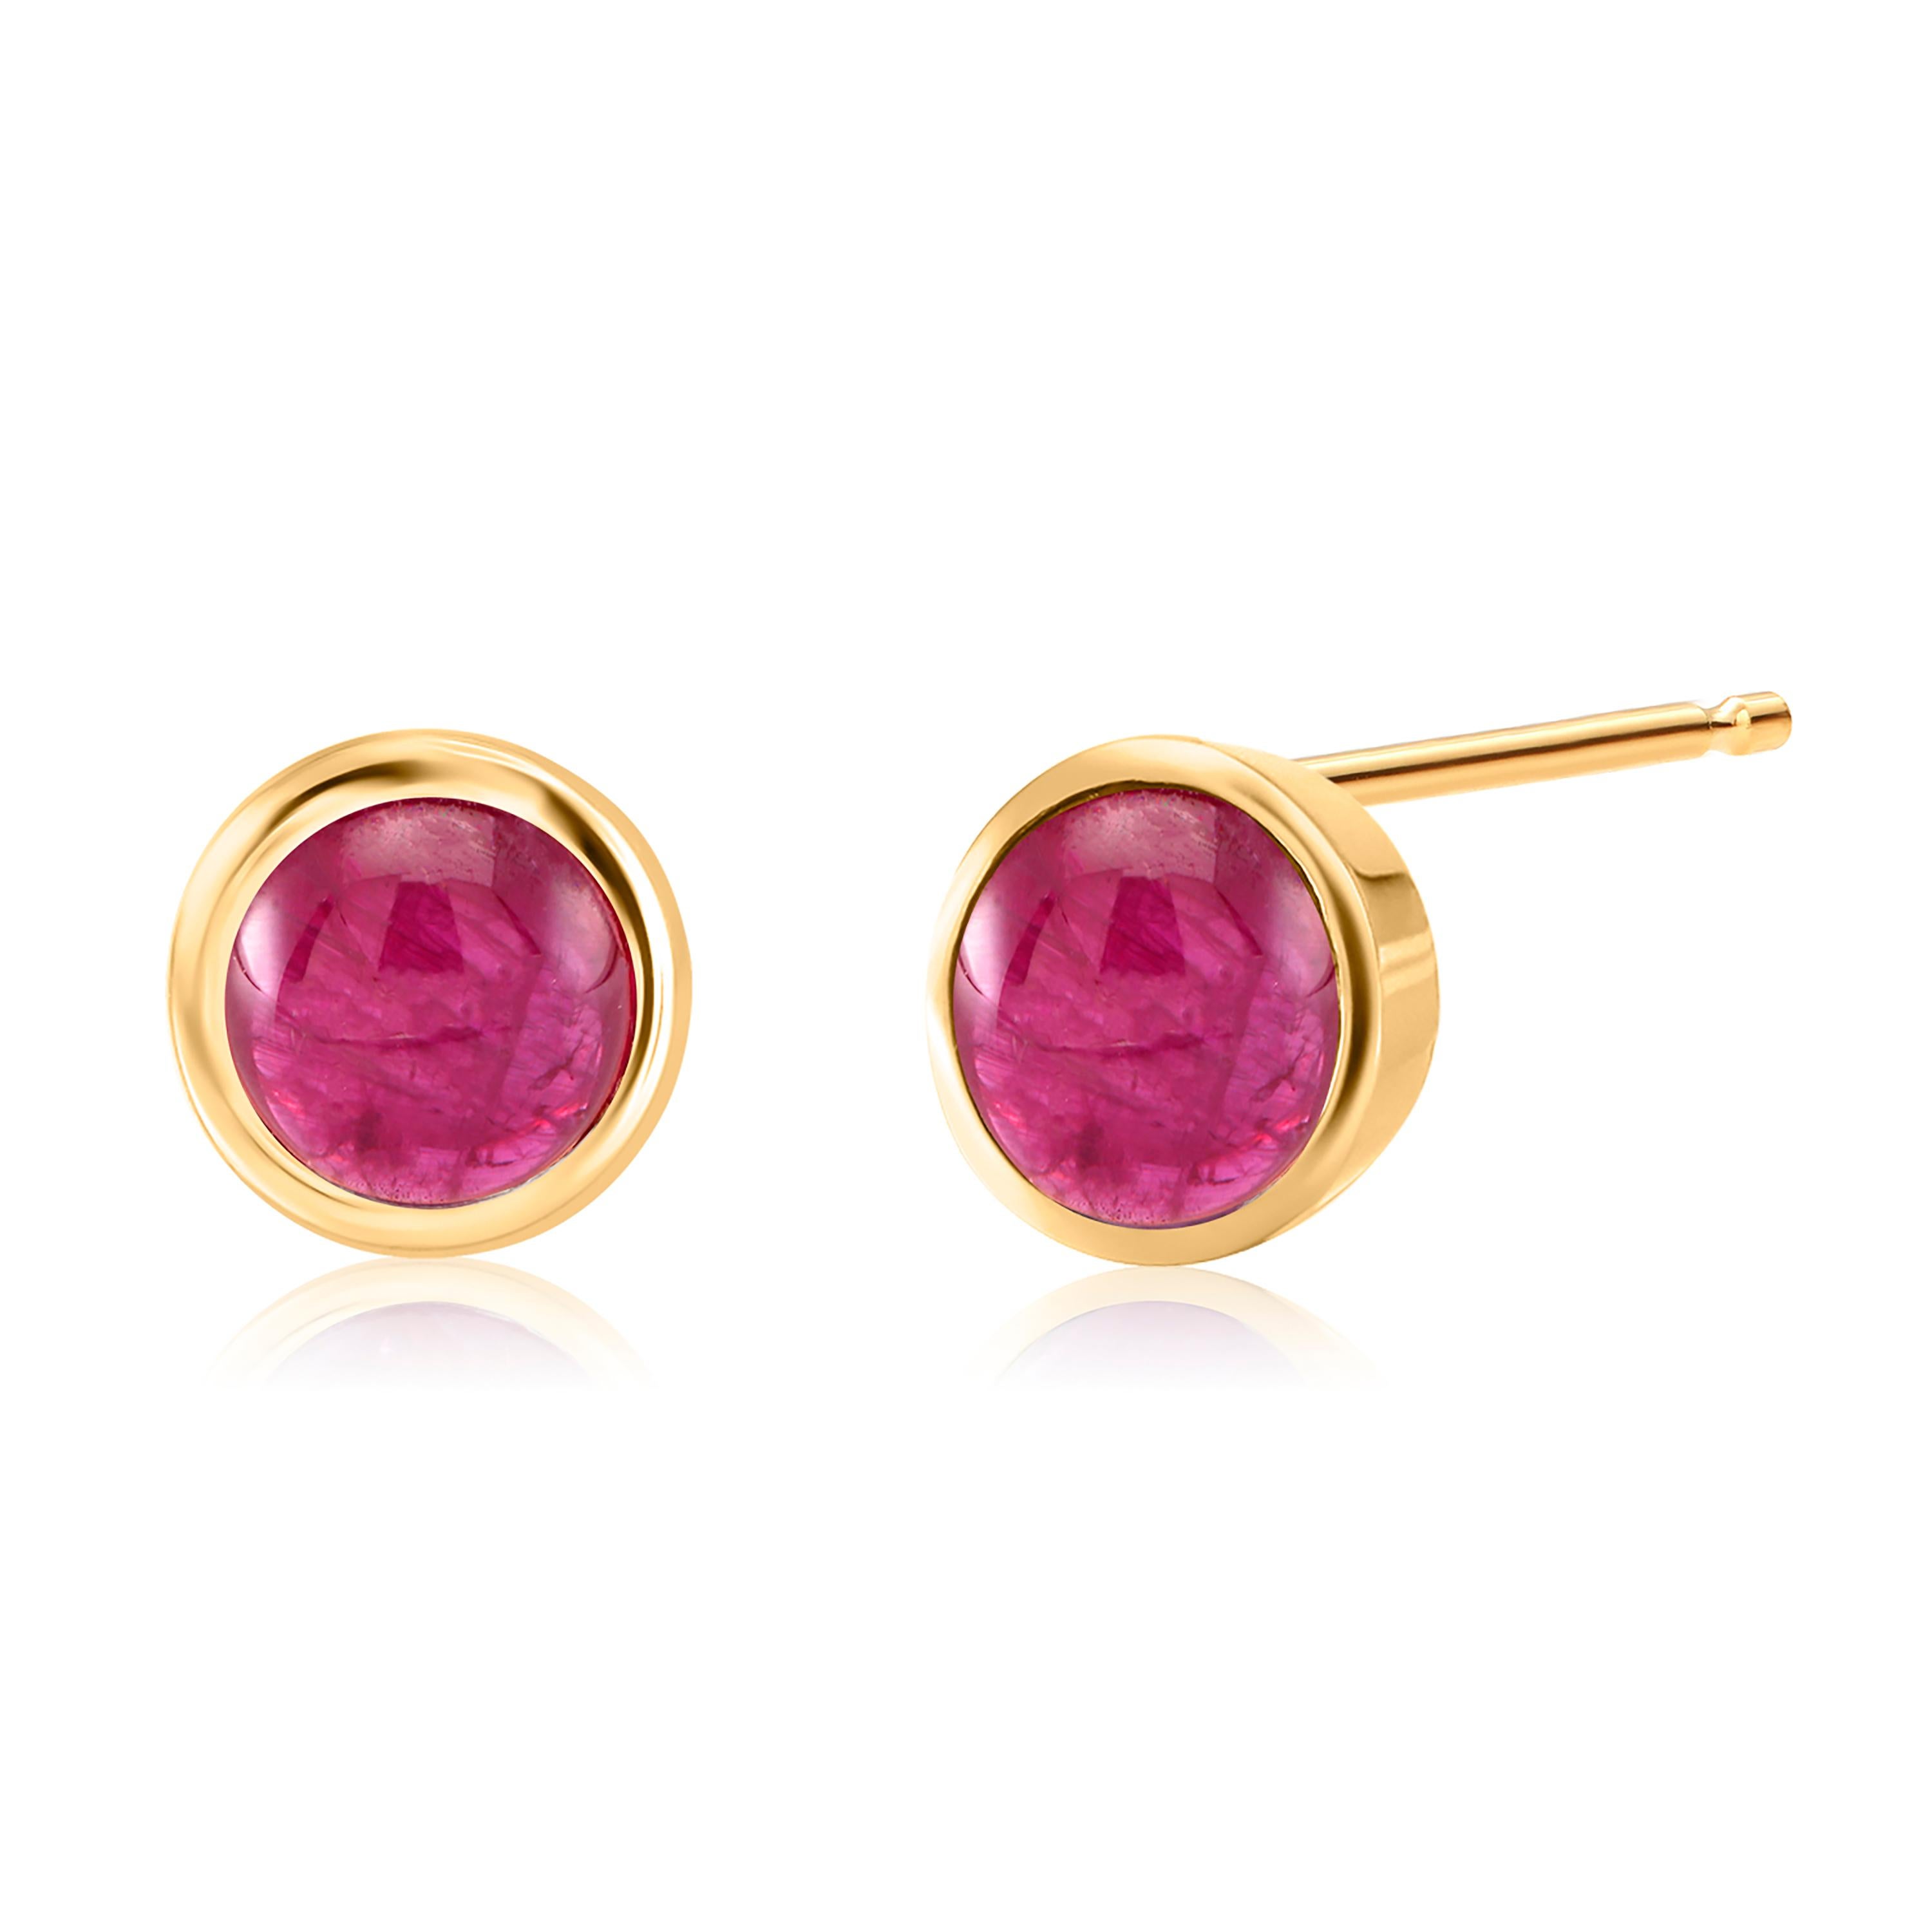 Two Matched Cabochon Burma Ruby Bezel Set Yellow Gold Stud Earrings 1